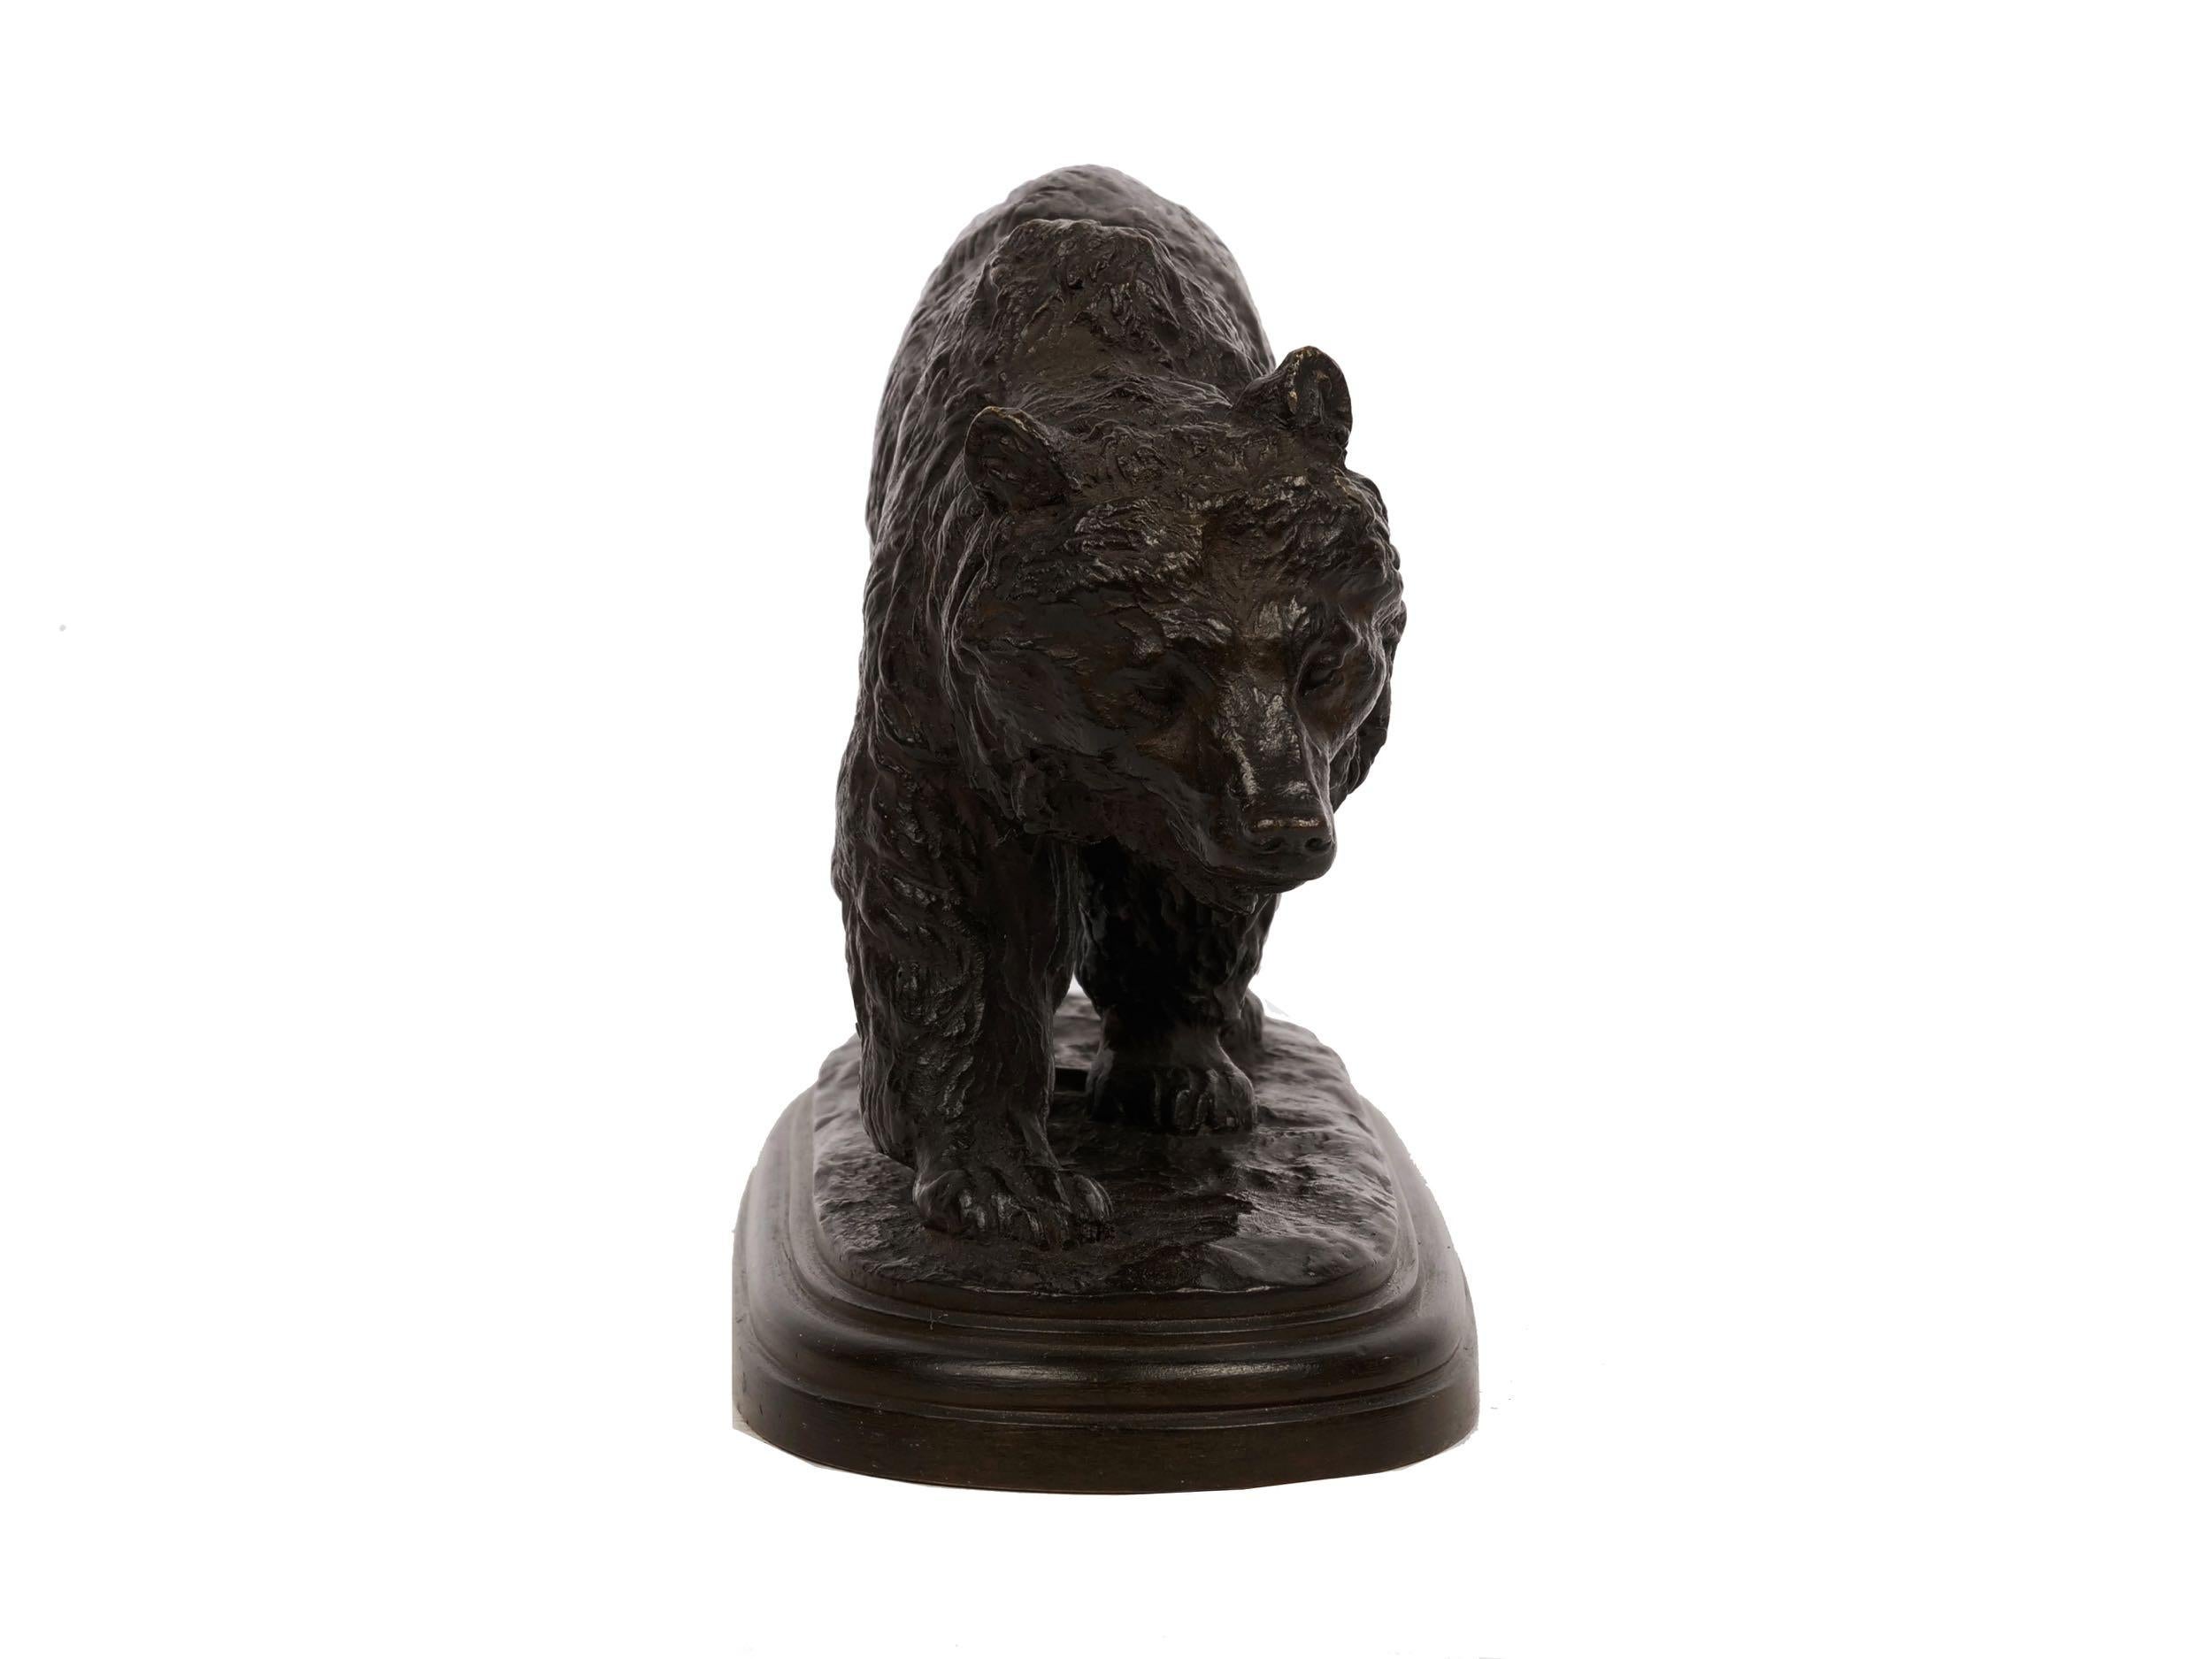 19th Century “Walking Bear” French Antique Bronze Sculpture by Isidore Bonheur